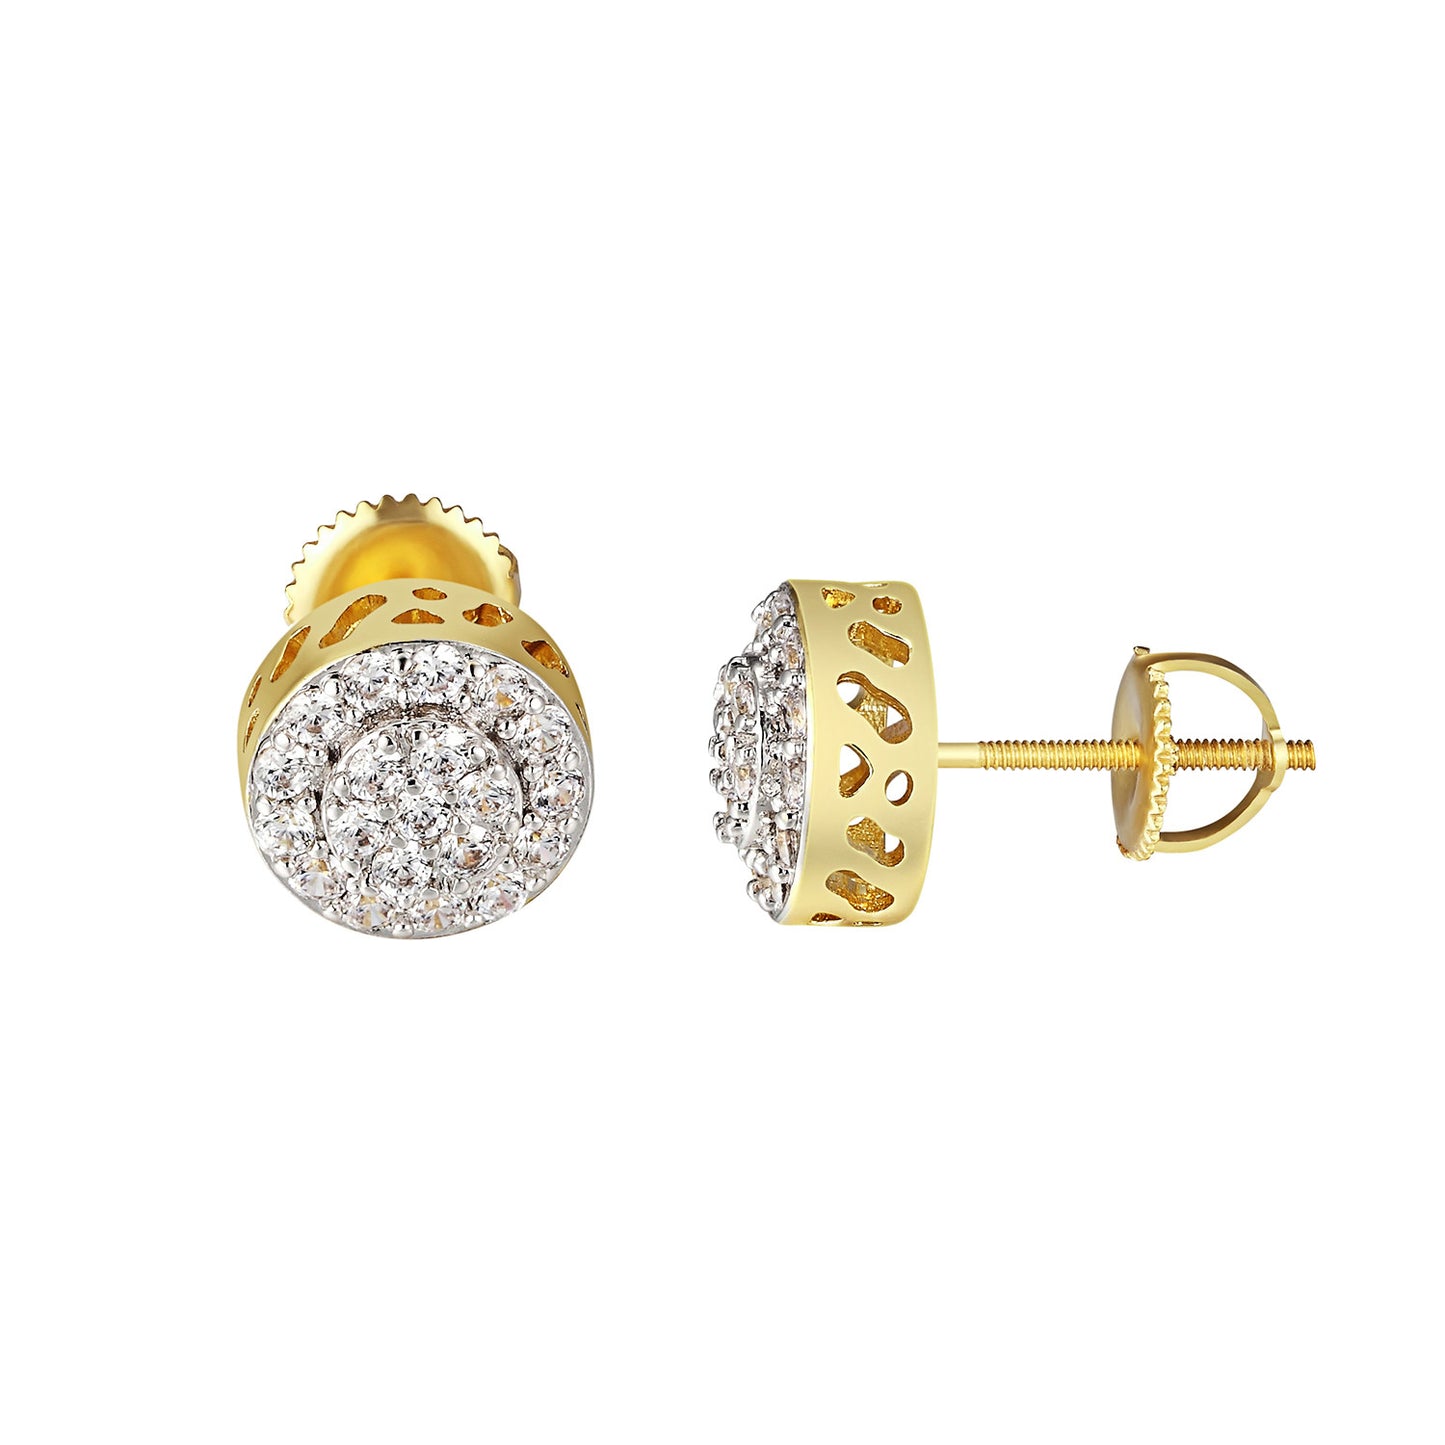 Cluster Set Halo Earrings 14k Yellow Gold Finish Simulated Diamonds Studs 10mm